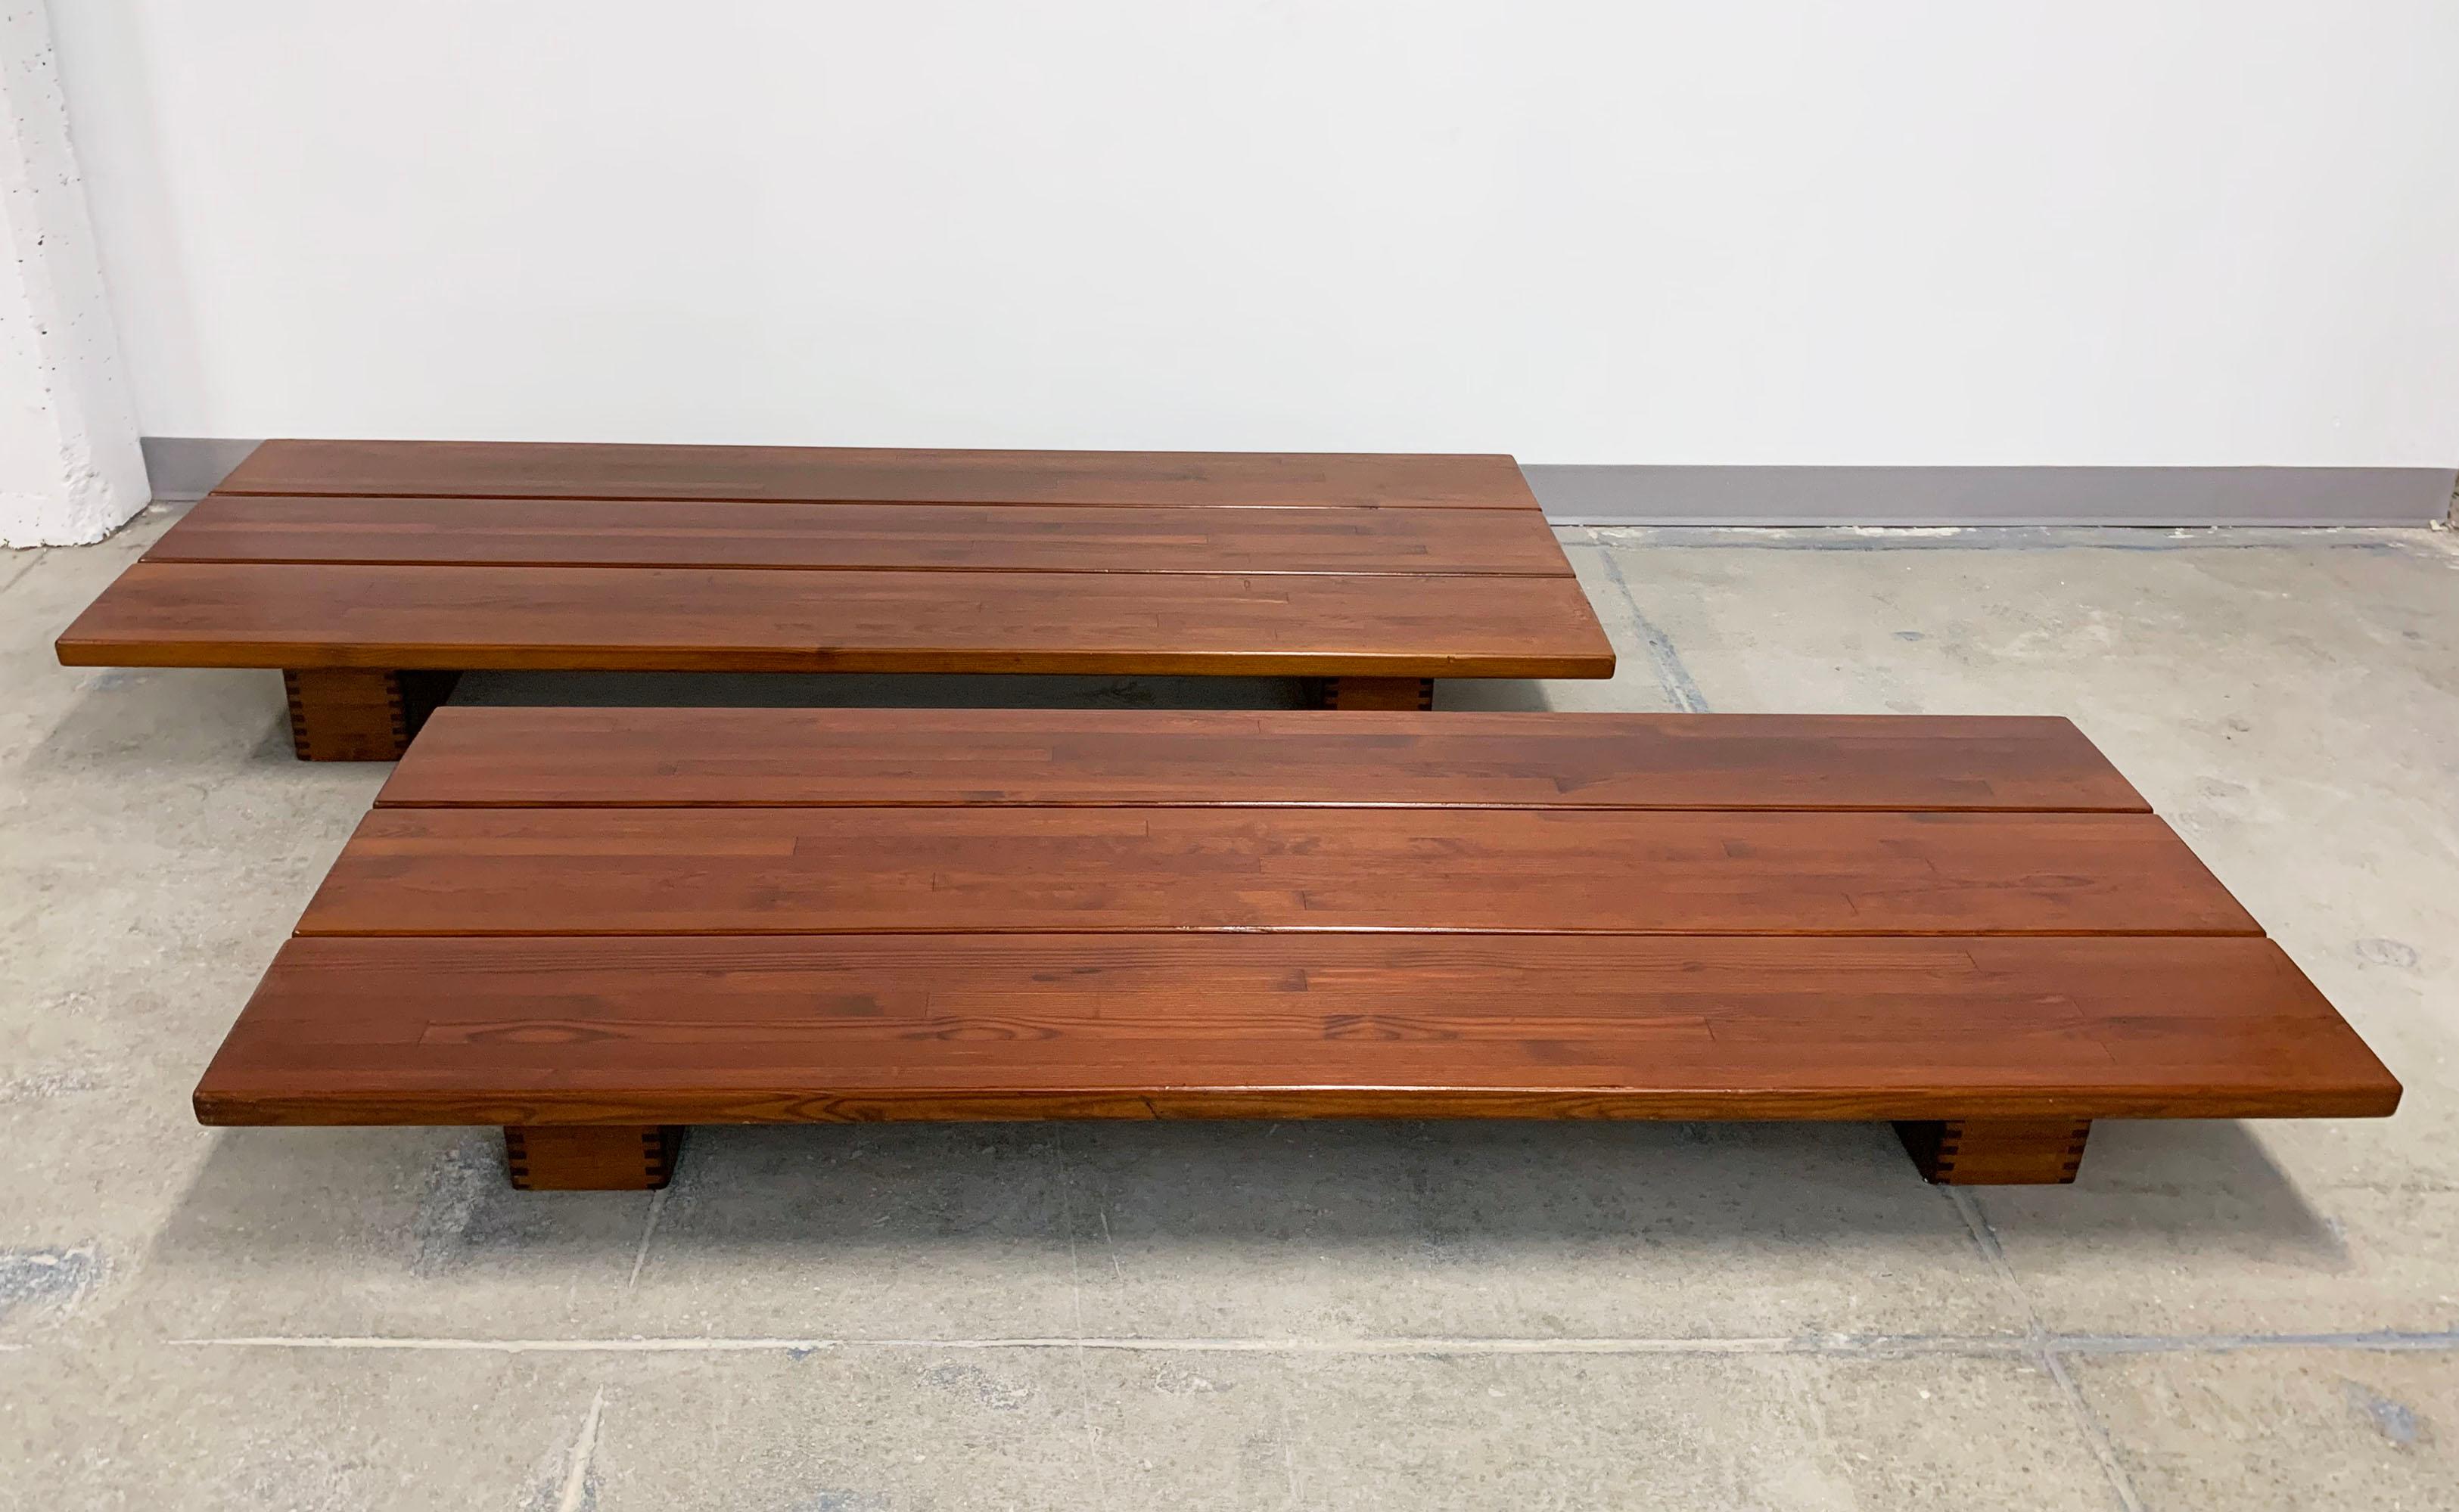 A pair of daybed benches by Ilmari Tapiovaara for Laukaan Puu of Finland, circa 1950s in staved pine. Sturdy platforms provide seating or may be used as coffee tables or cabinet stands.